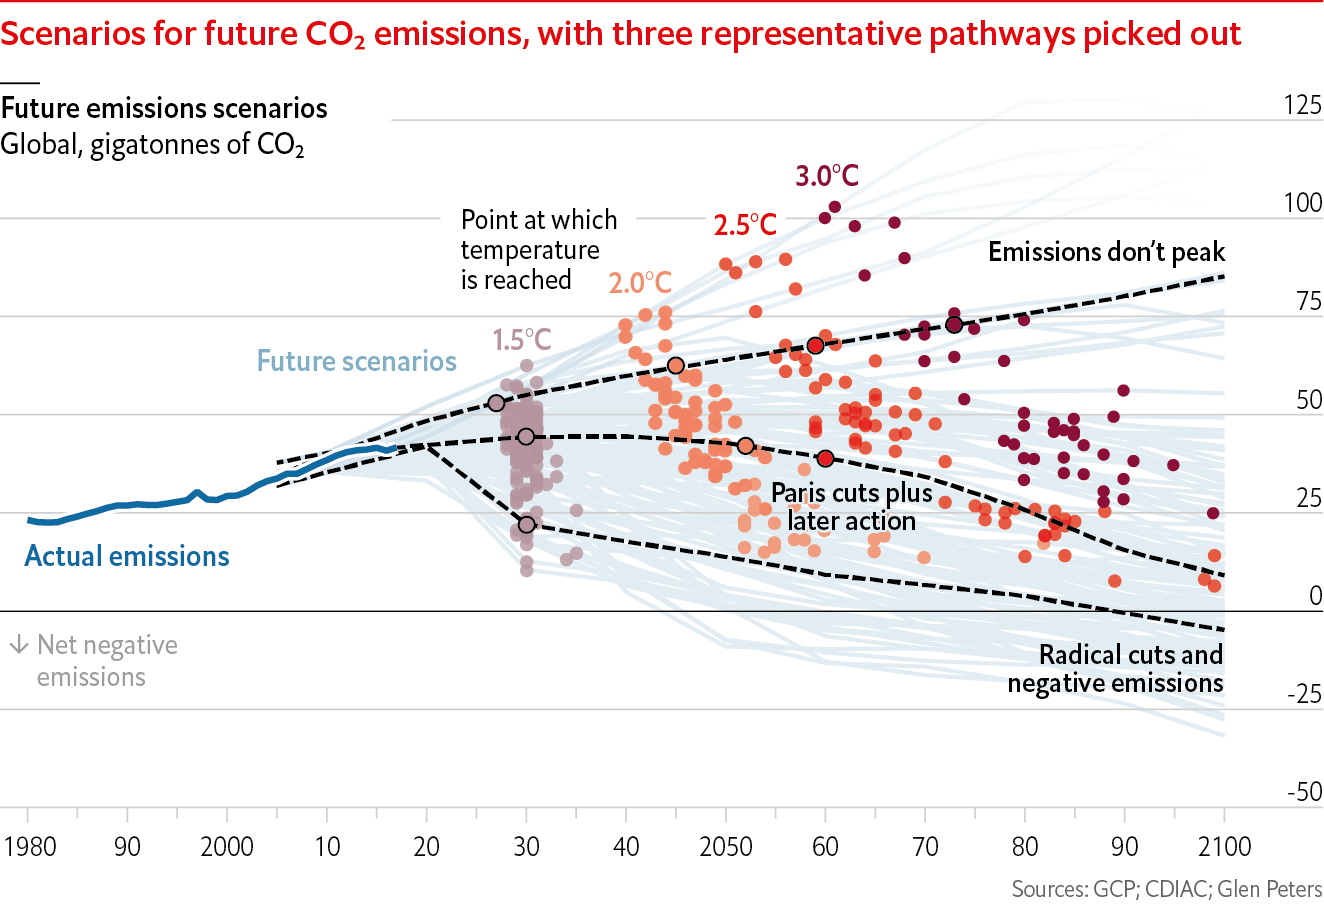 A line chart with many light grey lines and some dashed lines showing future emissions scenarios. The title of the chart is 'Scenarios for future CO2 emissions, with three representative pathways picked out'